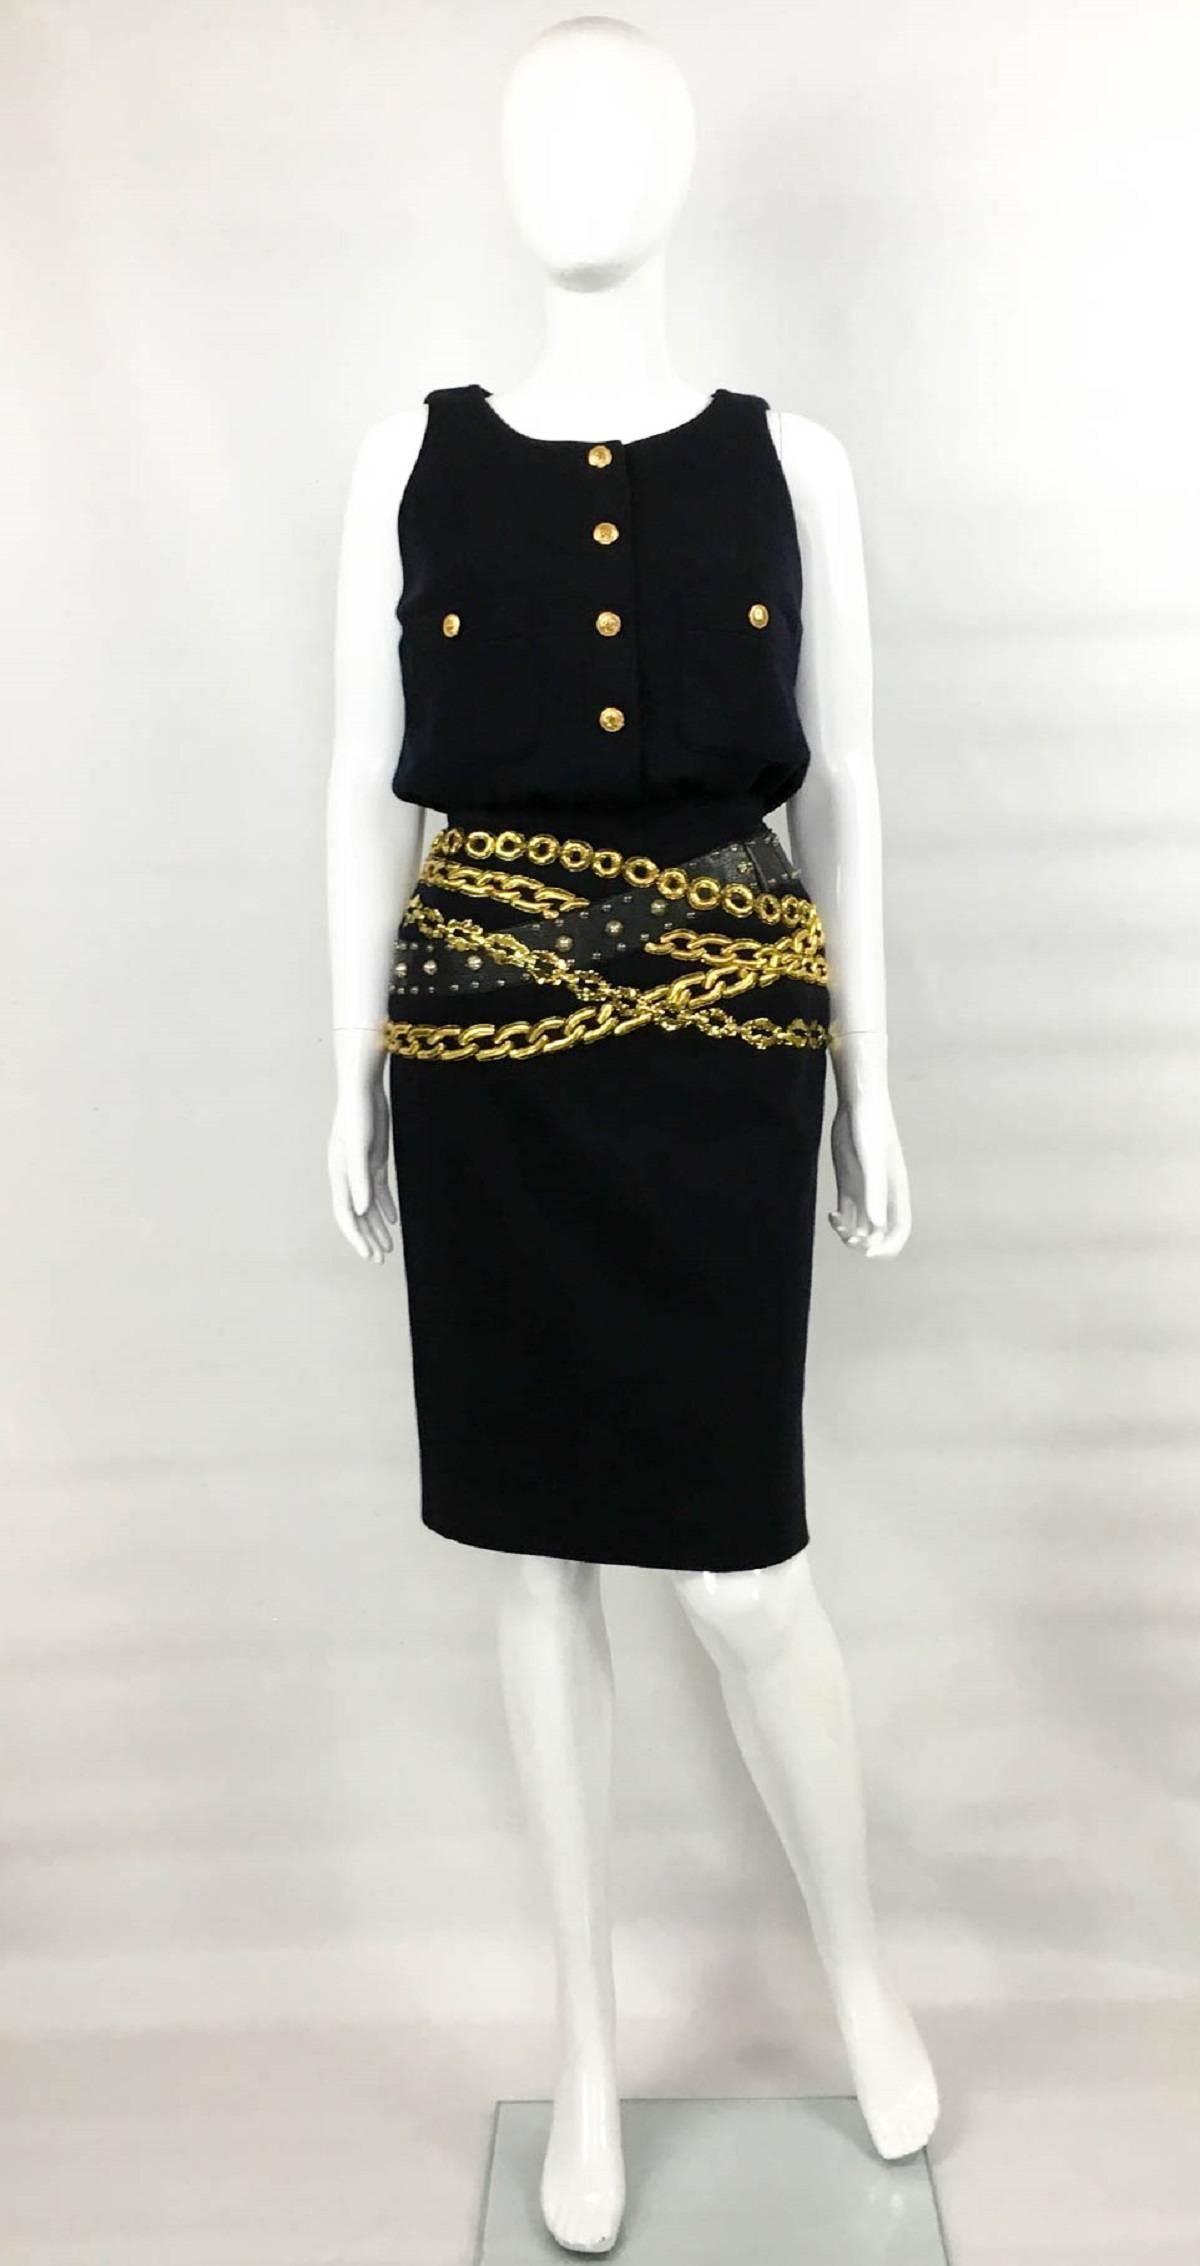 Amazing Vintage Chanel Chain Wool Black Dress. This fabulous dress was designed by Karl Lagerfeld for the 1985 Winter Collection. In this dress, Lagerfeld reworked Coco Chanel’s signature and paid homage to her frequent usage of chains throughout